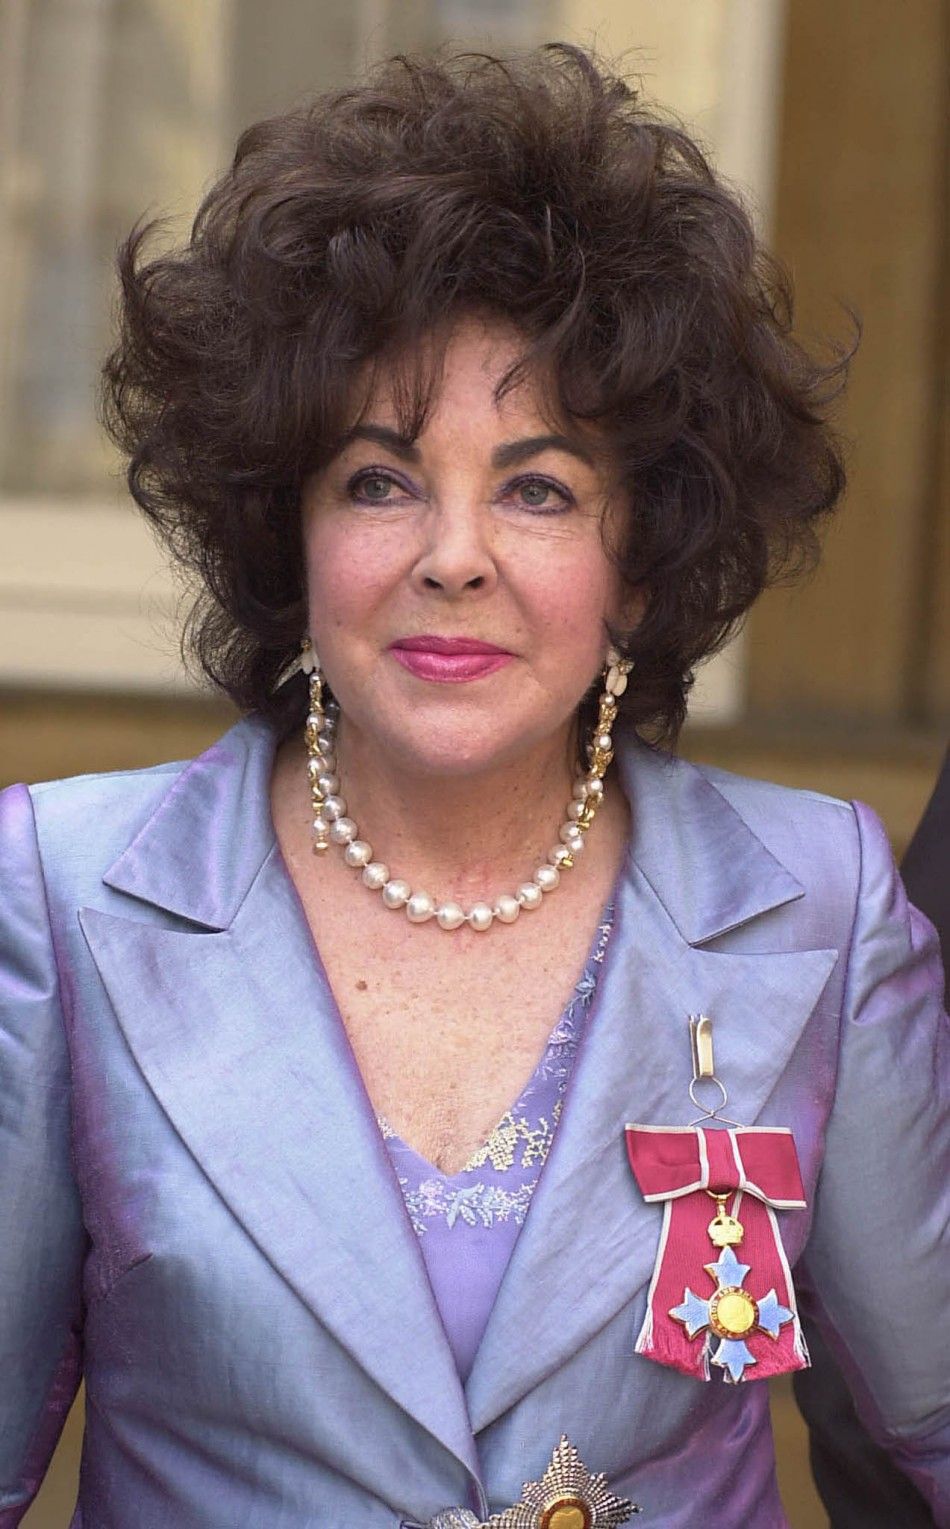 Elizabeth Taylor collection go up for auction